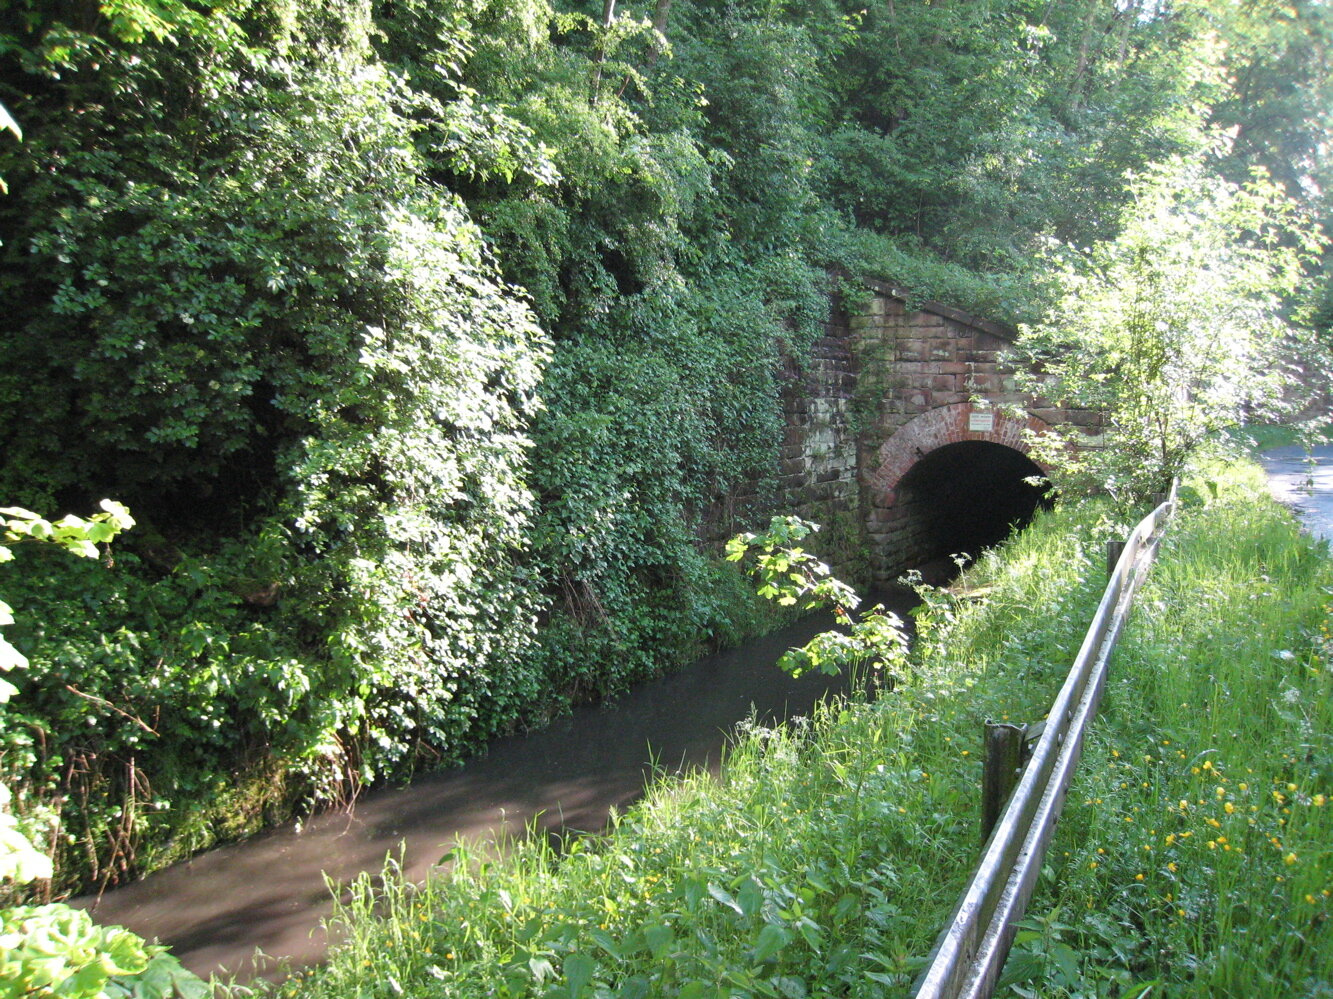  A culvert where slave laborers took cover during bombing raids.  